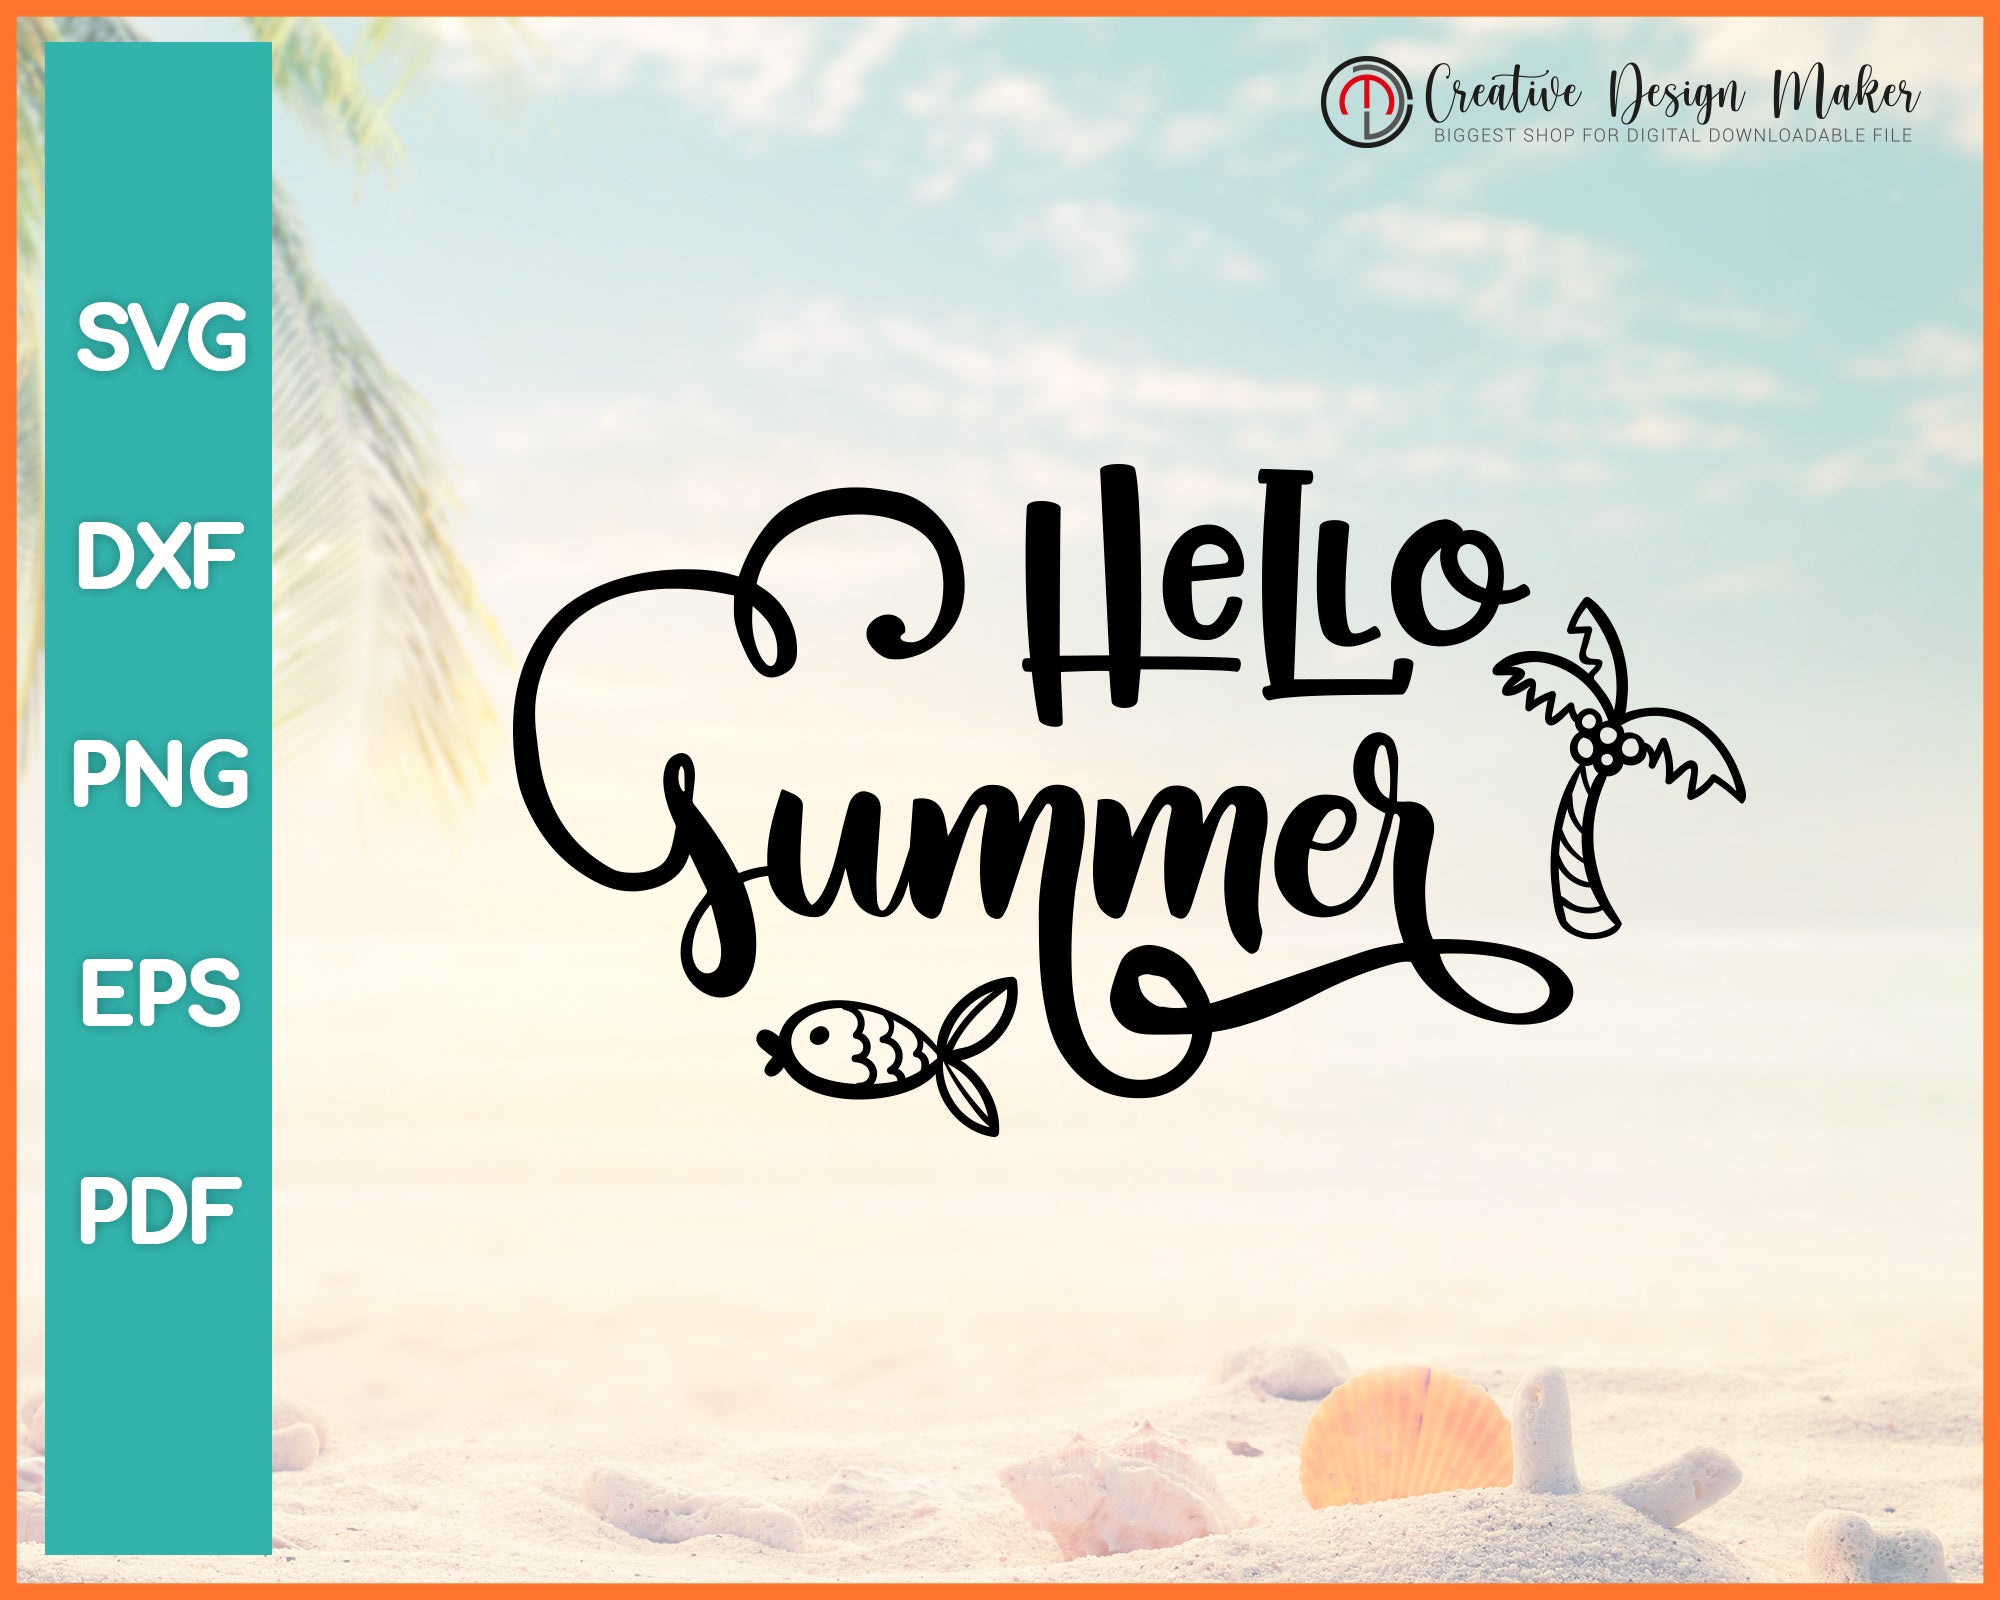 Download Hello Summer Svg Print Or More Cut Files Dxf Instant Files Download Svg Png Hello Summer Bundle Digital Clipart For Design Paper Party Kids Craft Supplies Tools